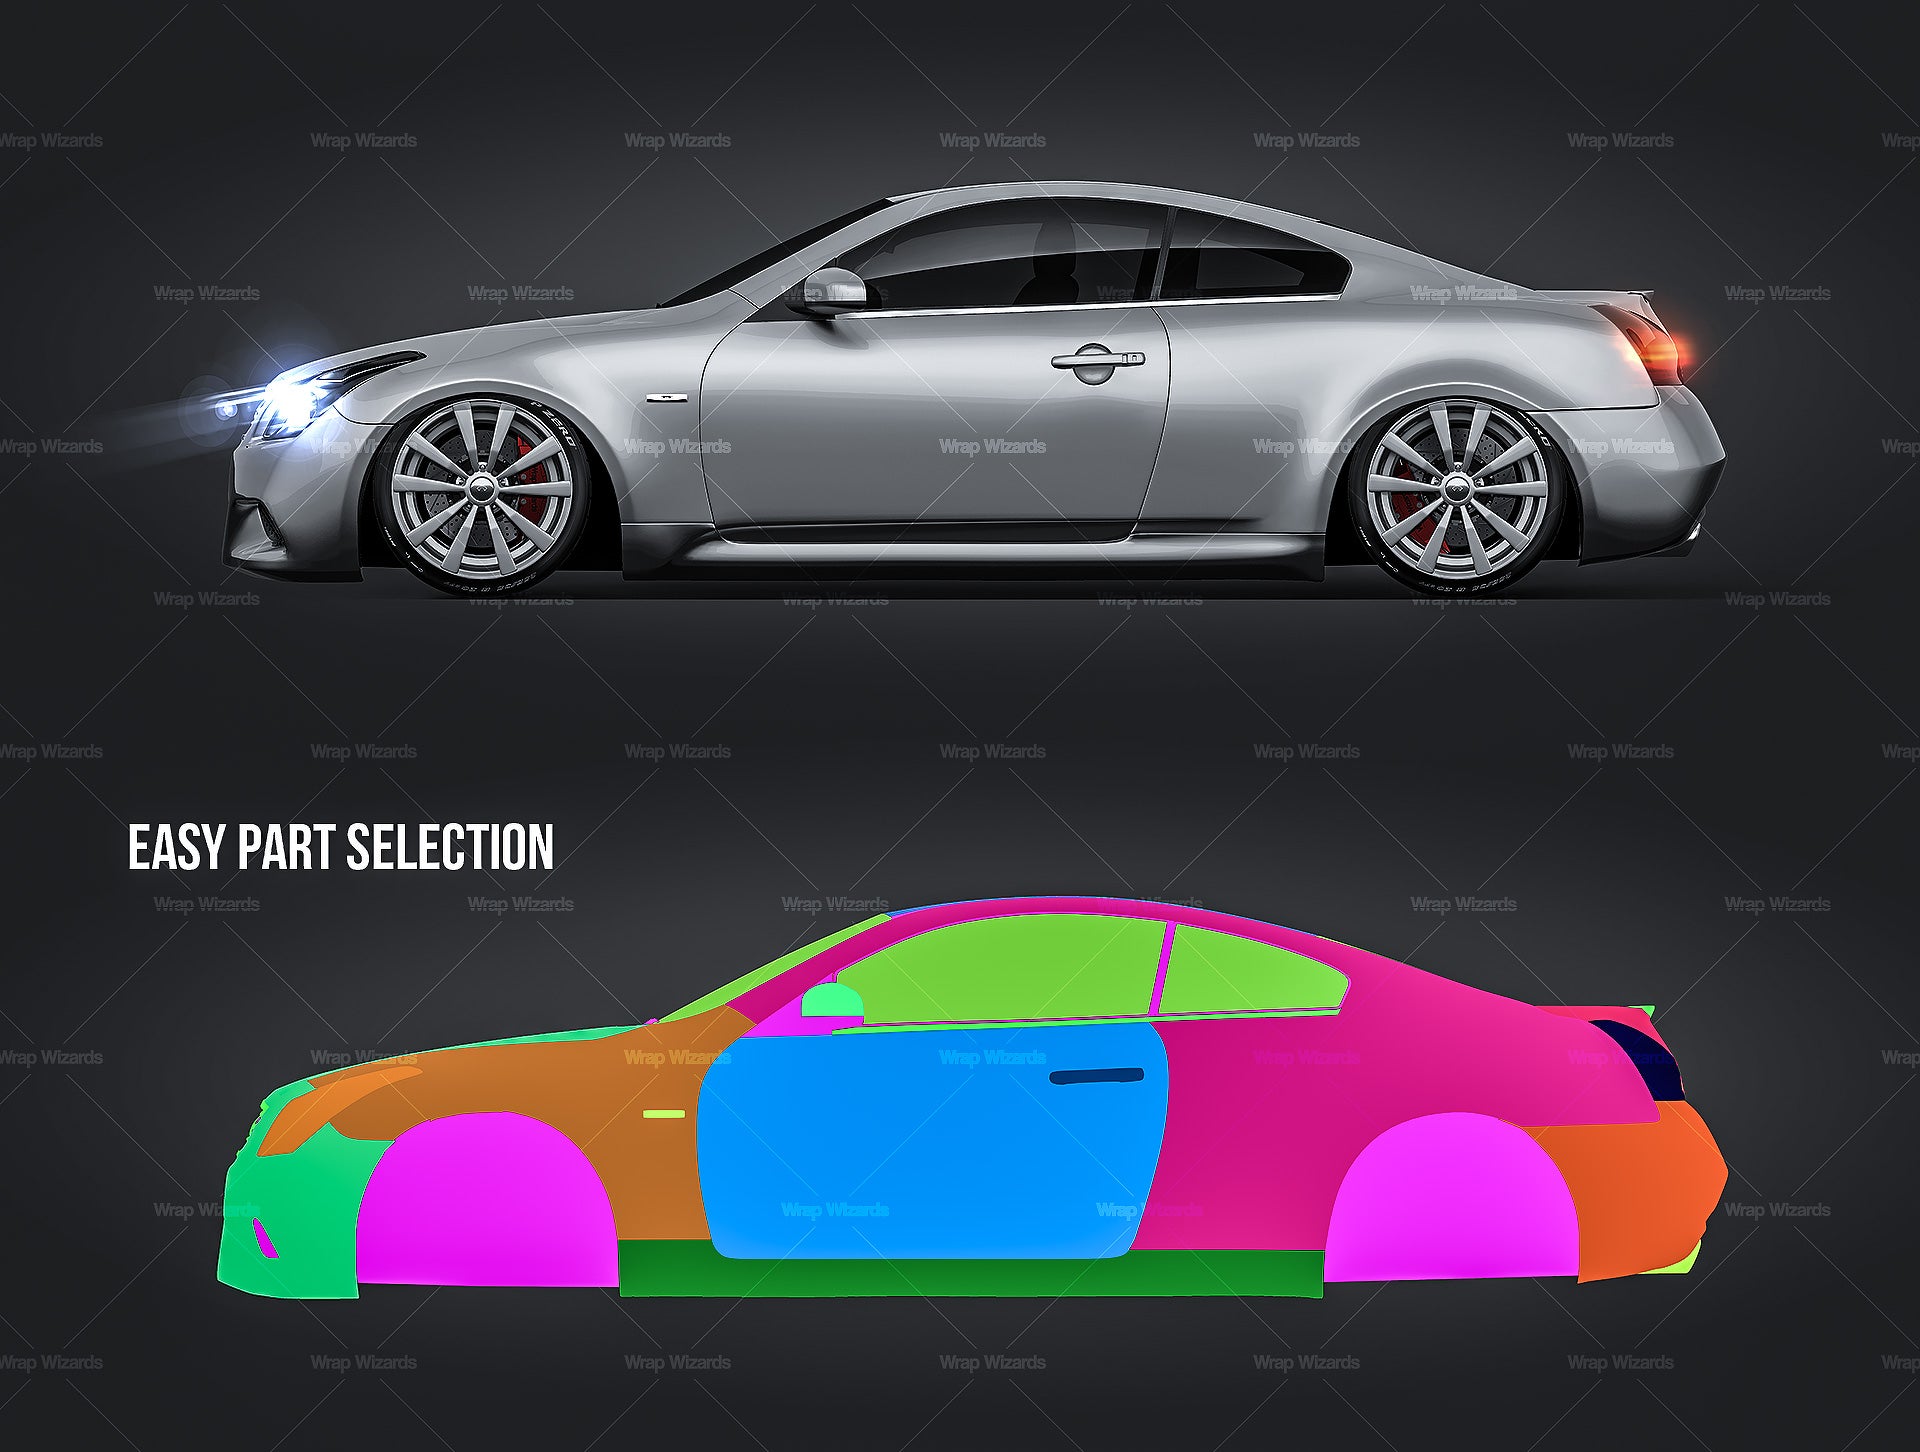 Infiniti G37 Coupe 2014 glossy finish - all sides Car Mockup Template.psd